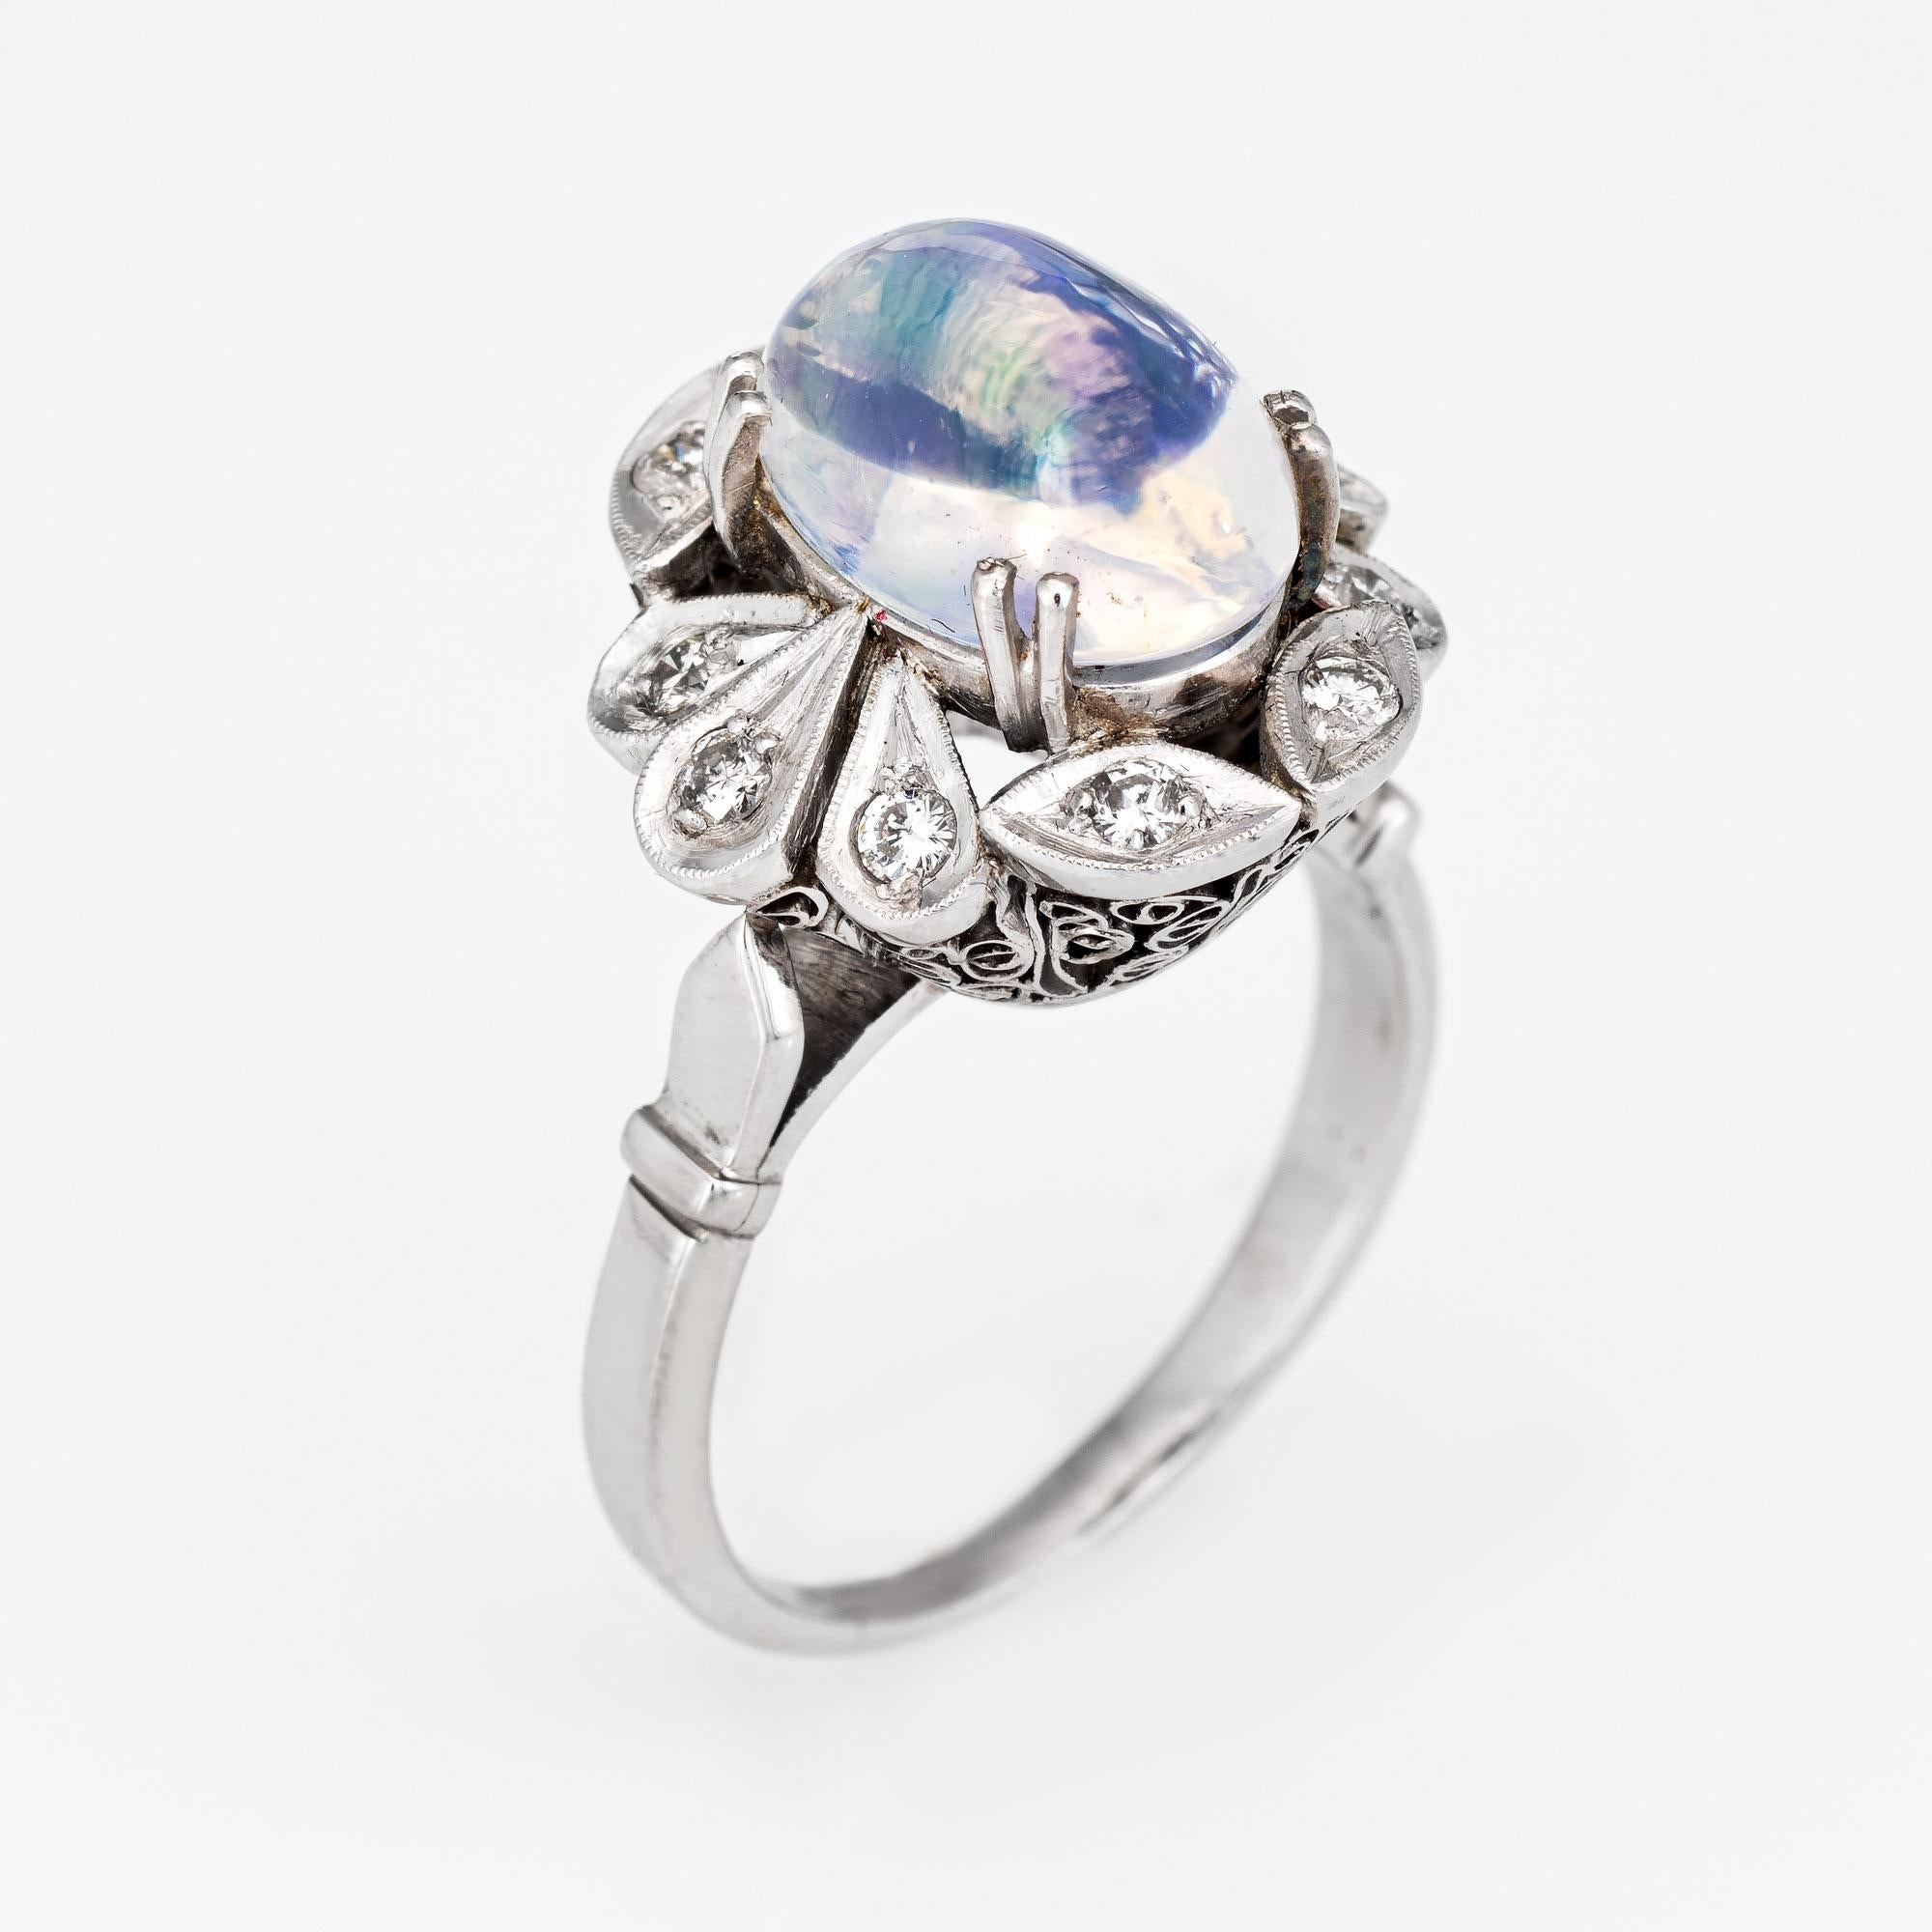 Stylish natural jelly opal & diamond cocktail ring crafted in 900 platinum. 

Cabochon cut natural jelly opal, 3.15 carats (11.33 x 7.29 x 6.31mm). The opal  is in excellent condition and free of cracks or chips. The opal exhibits a strong play of